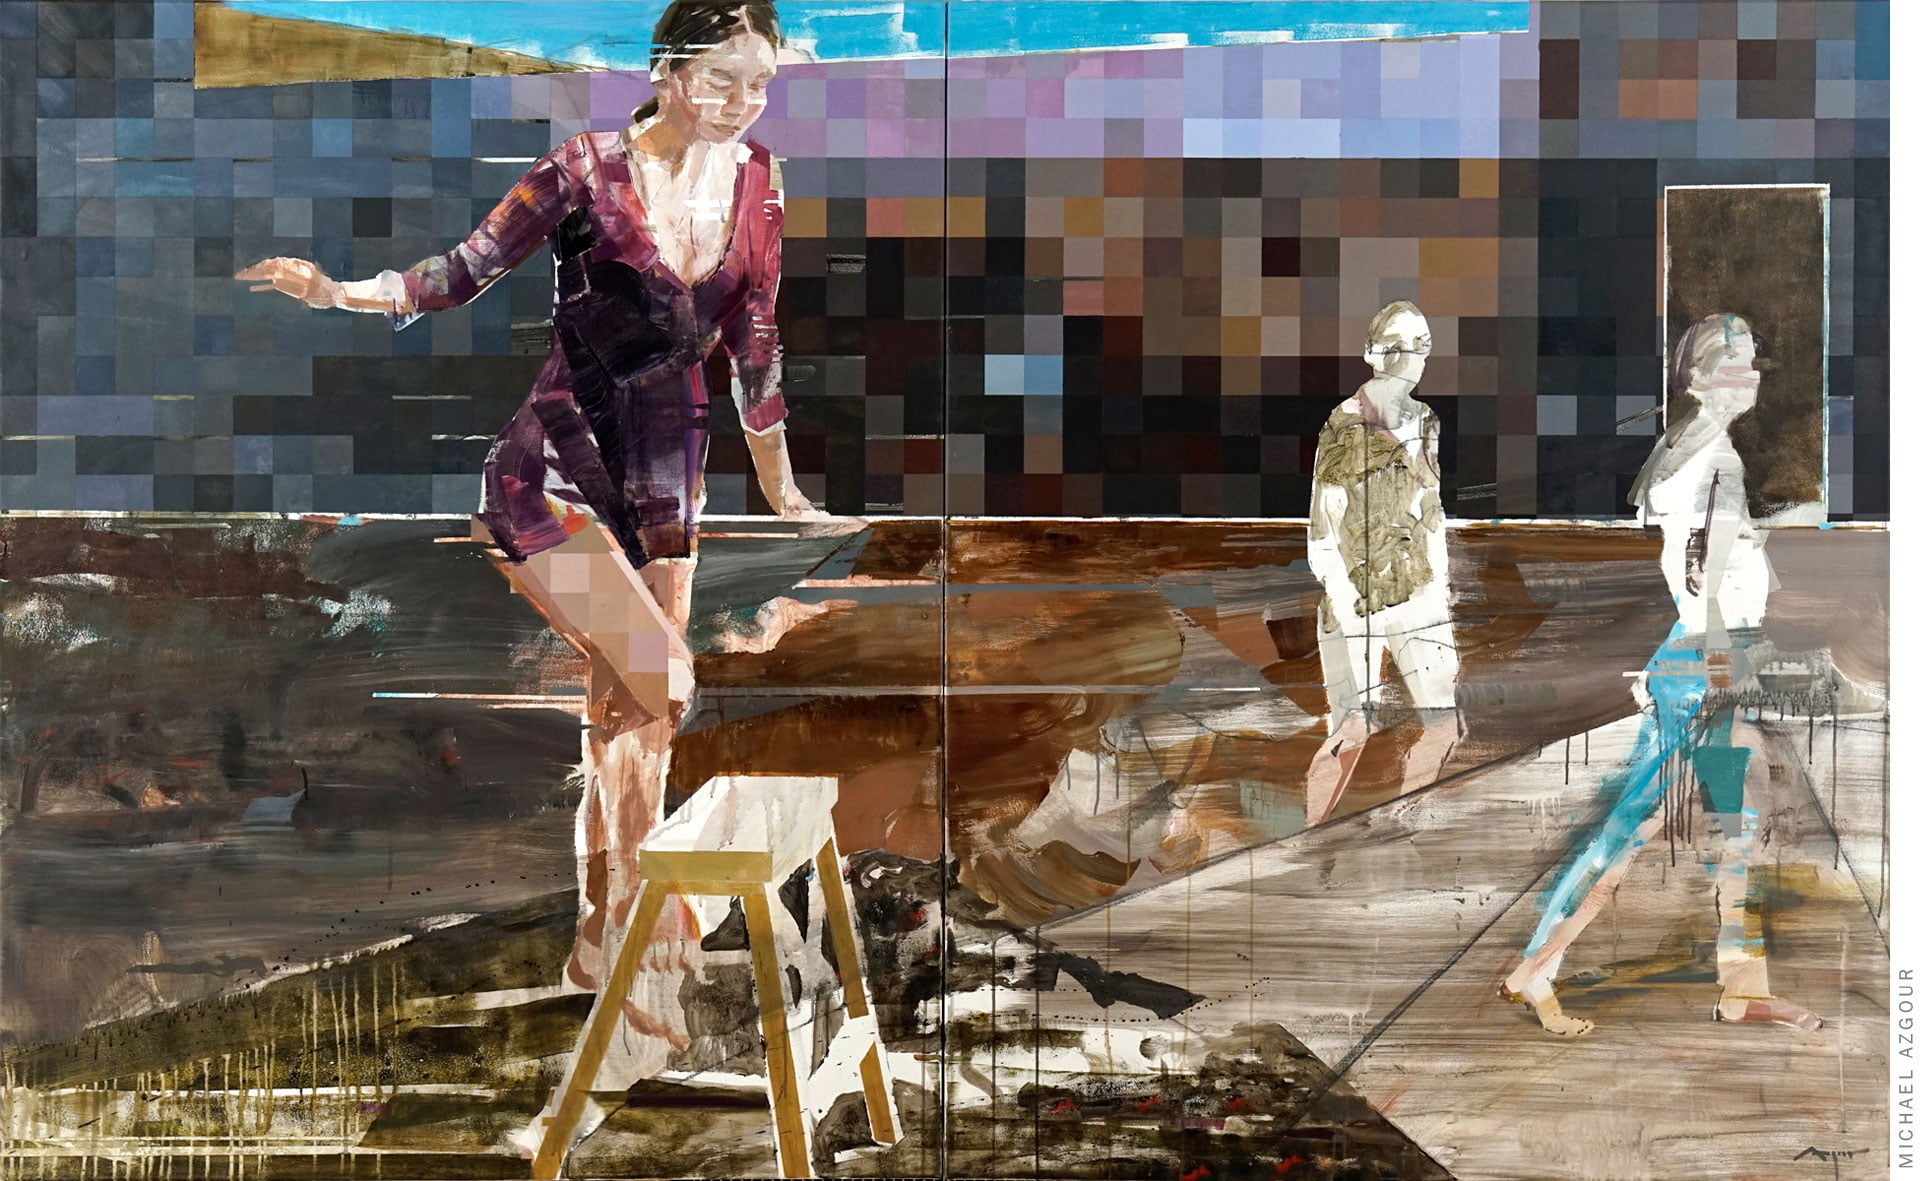 conceptual painting depicts female figures walking and posing in an industrial urban location. Geometric forms and expressive strokes evoke the idea of visual perception in this contemporary world. Original artwork titled Migration.